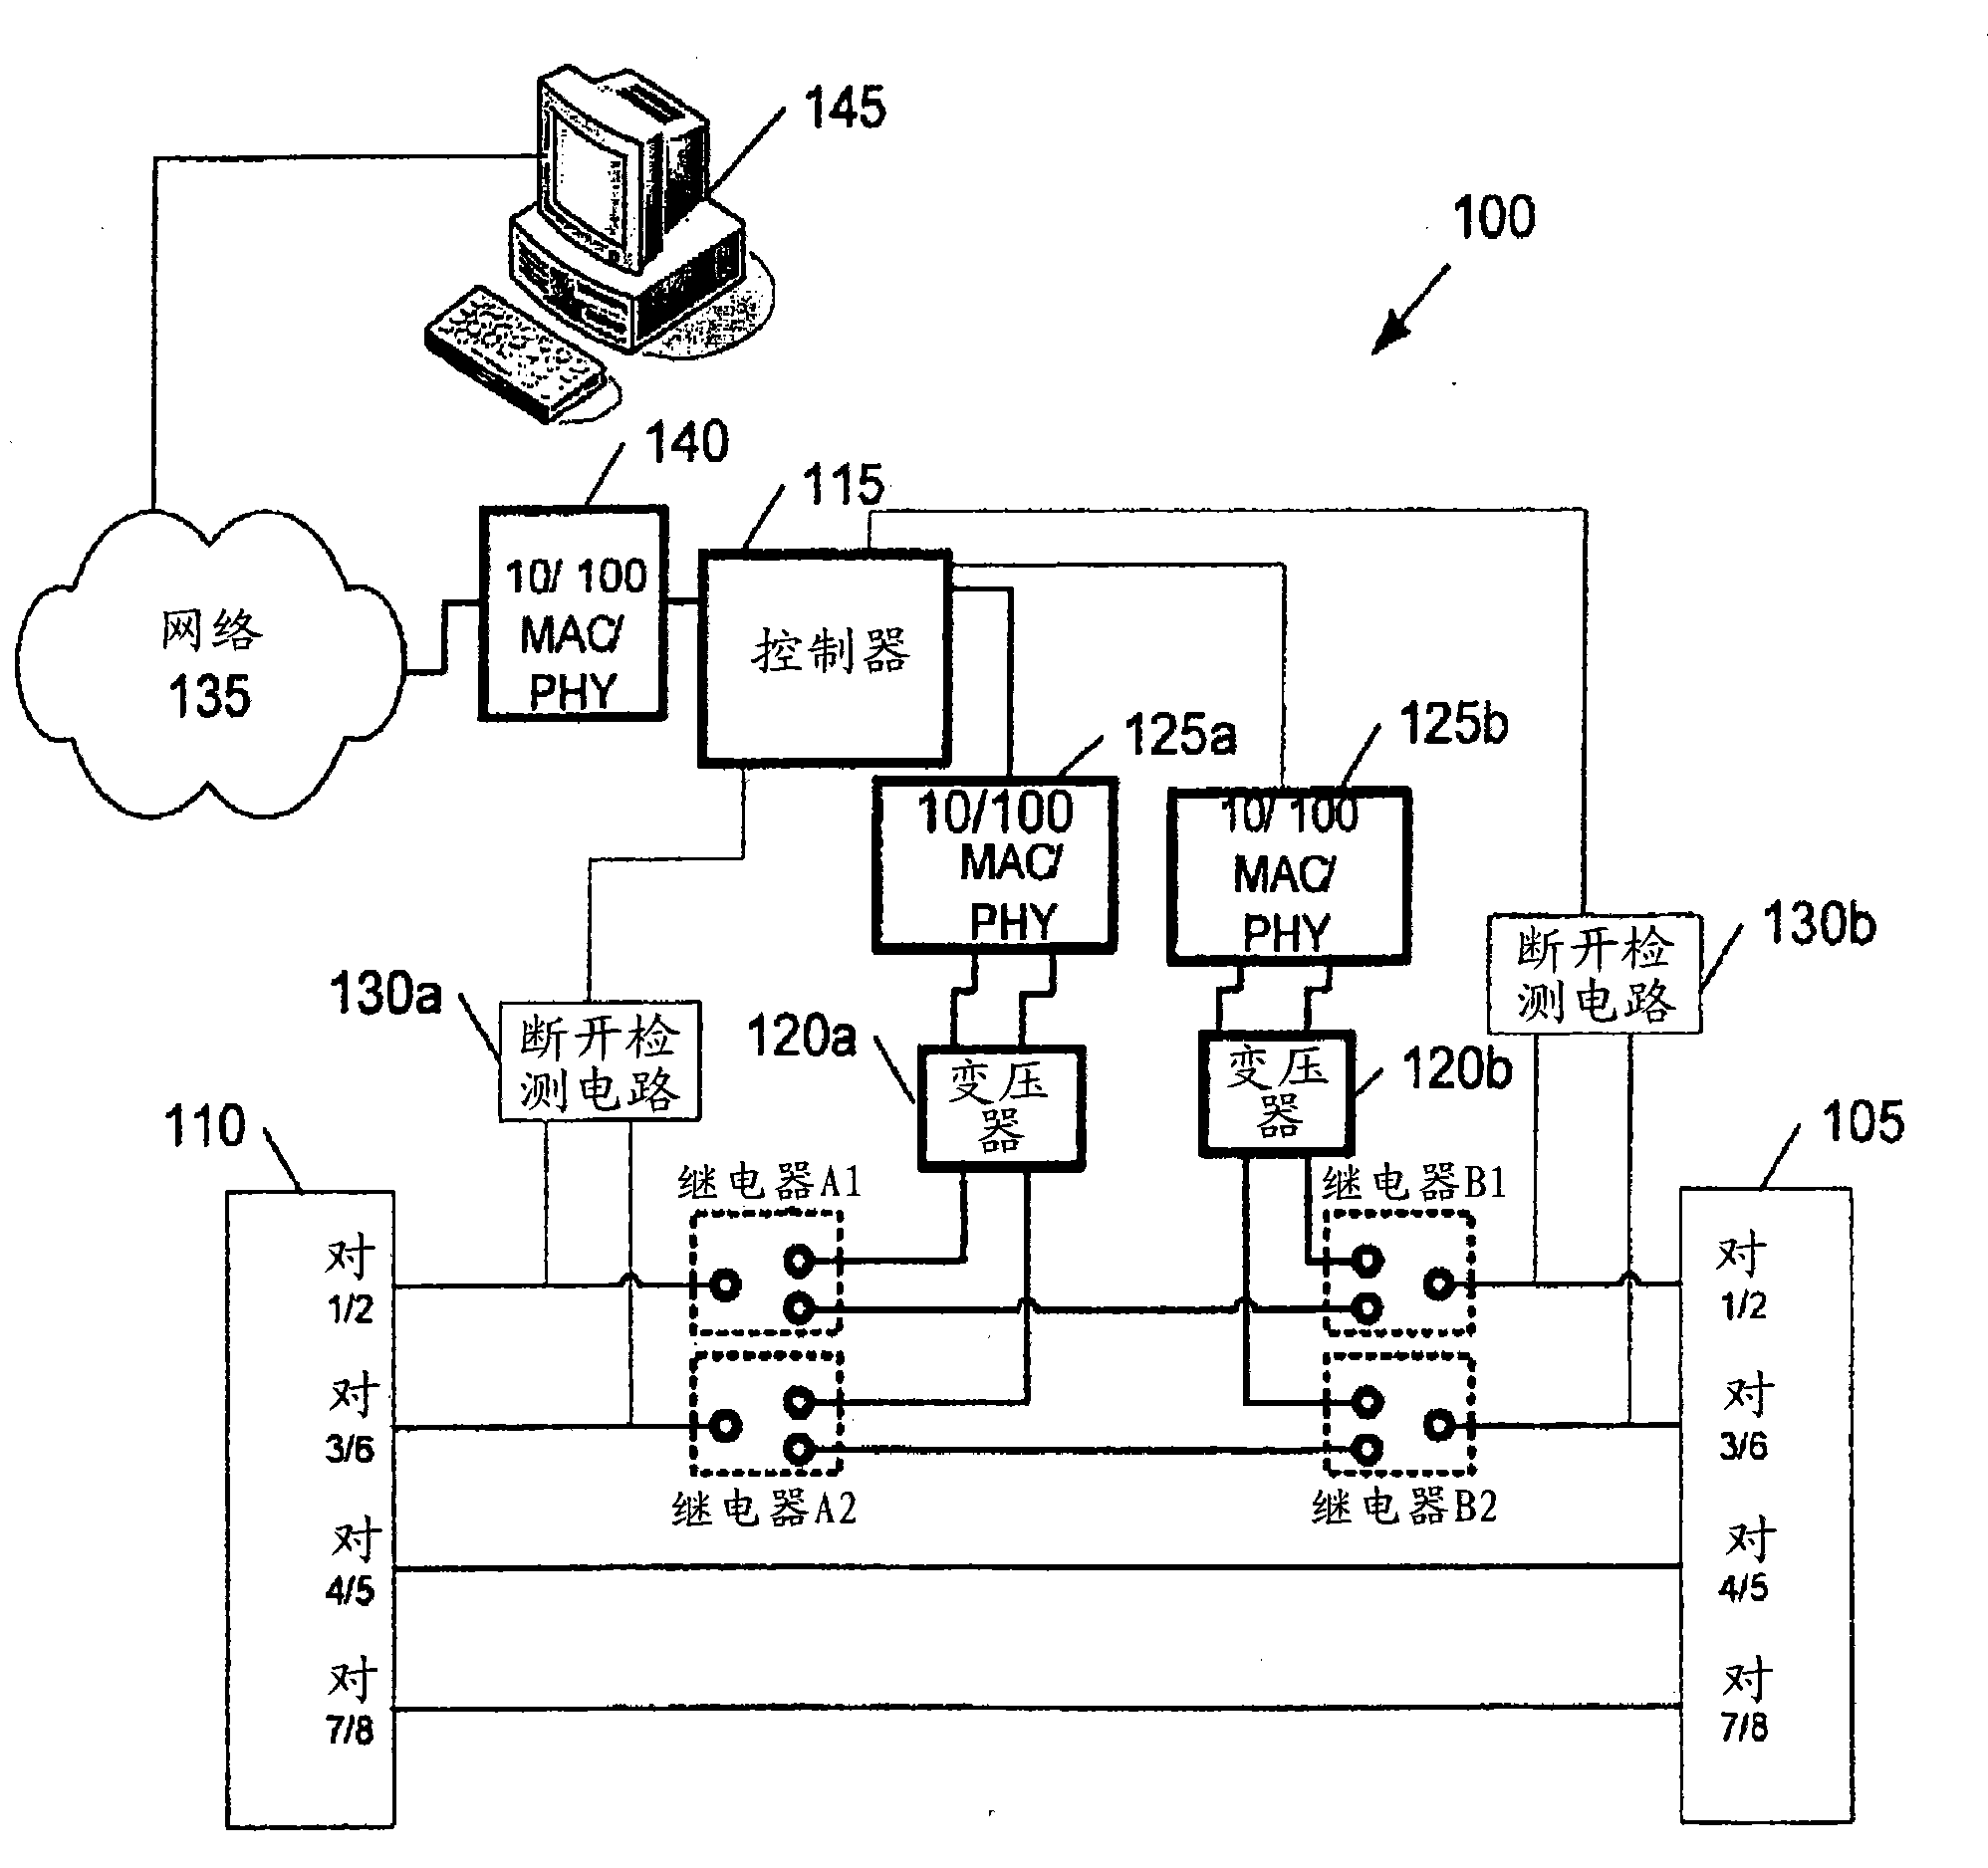 Methods, systems, and computer program products for using managed port circuitry